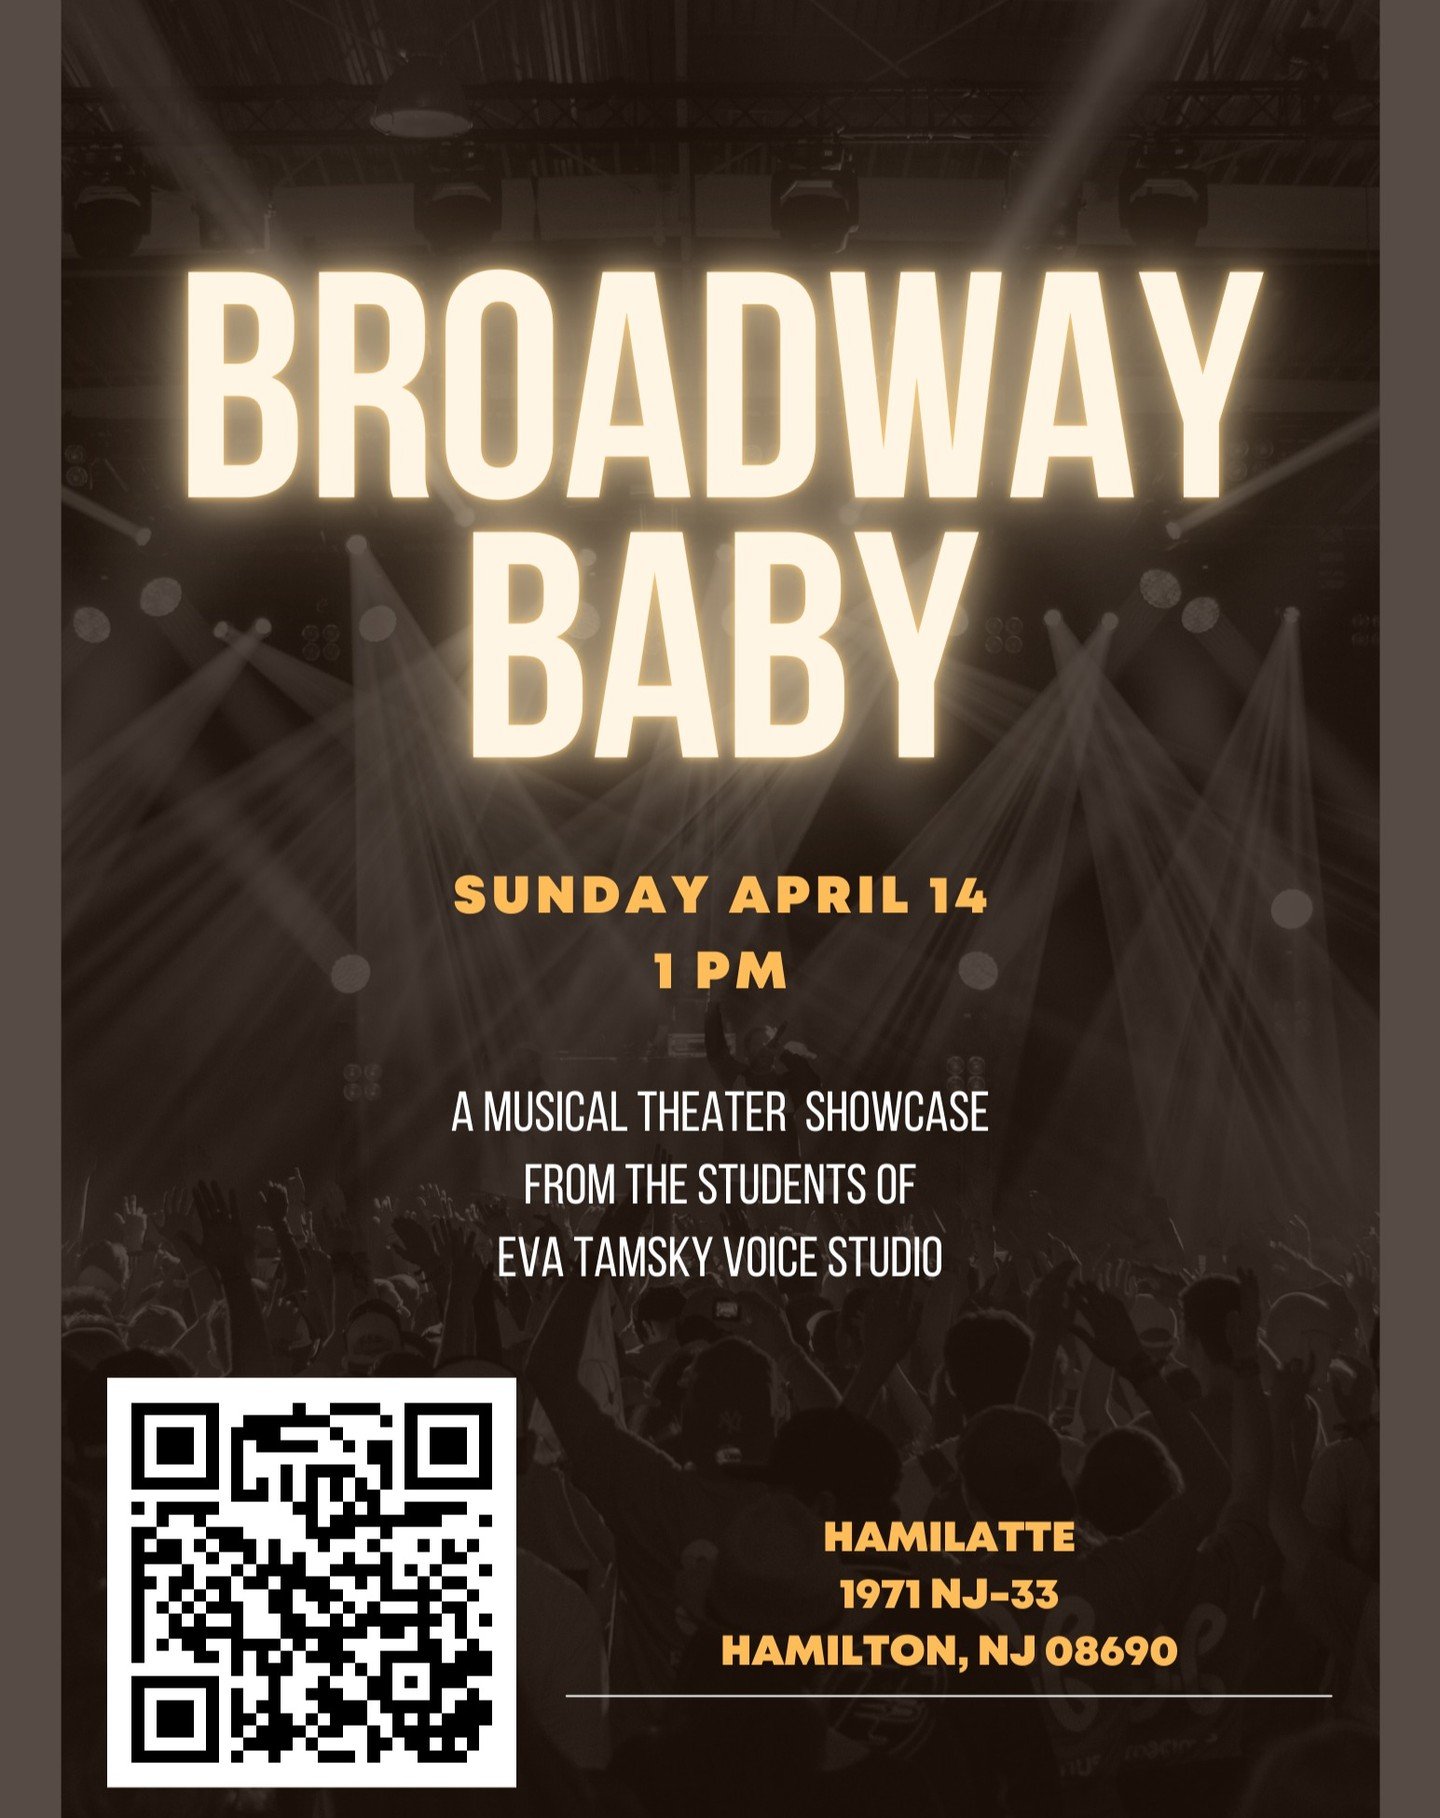 Tomorrow is the day!!! Can't wait to see you there! 
Our Broadway Baby showcase will be on Sunday April 14th at 1pm. It's going to be a fun filled afternoon of musical theater with everything from Kiss me Kate to Dear Evan Hansen, and everything in b